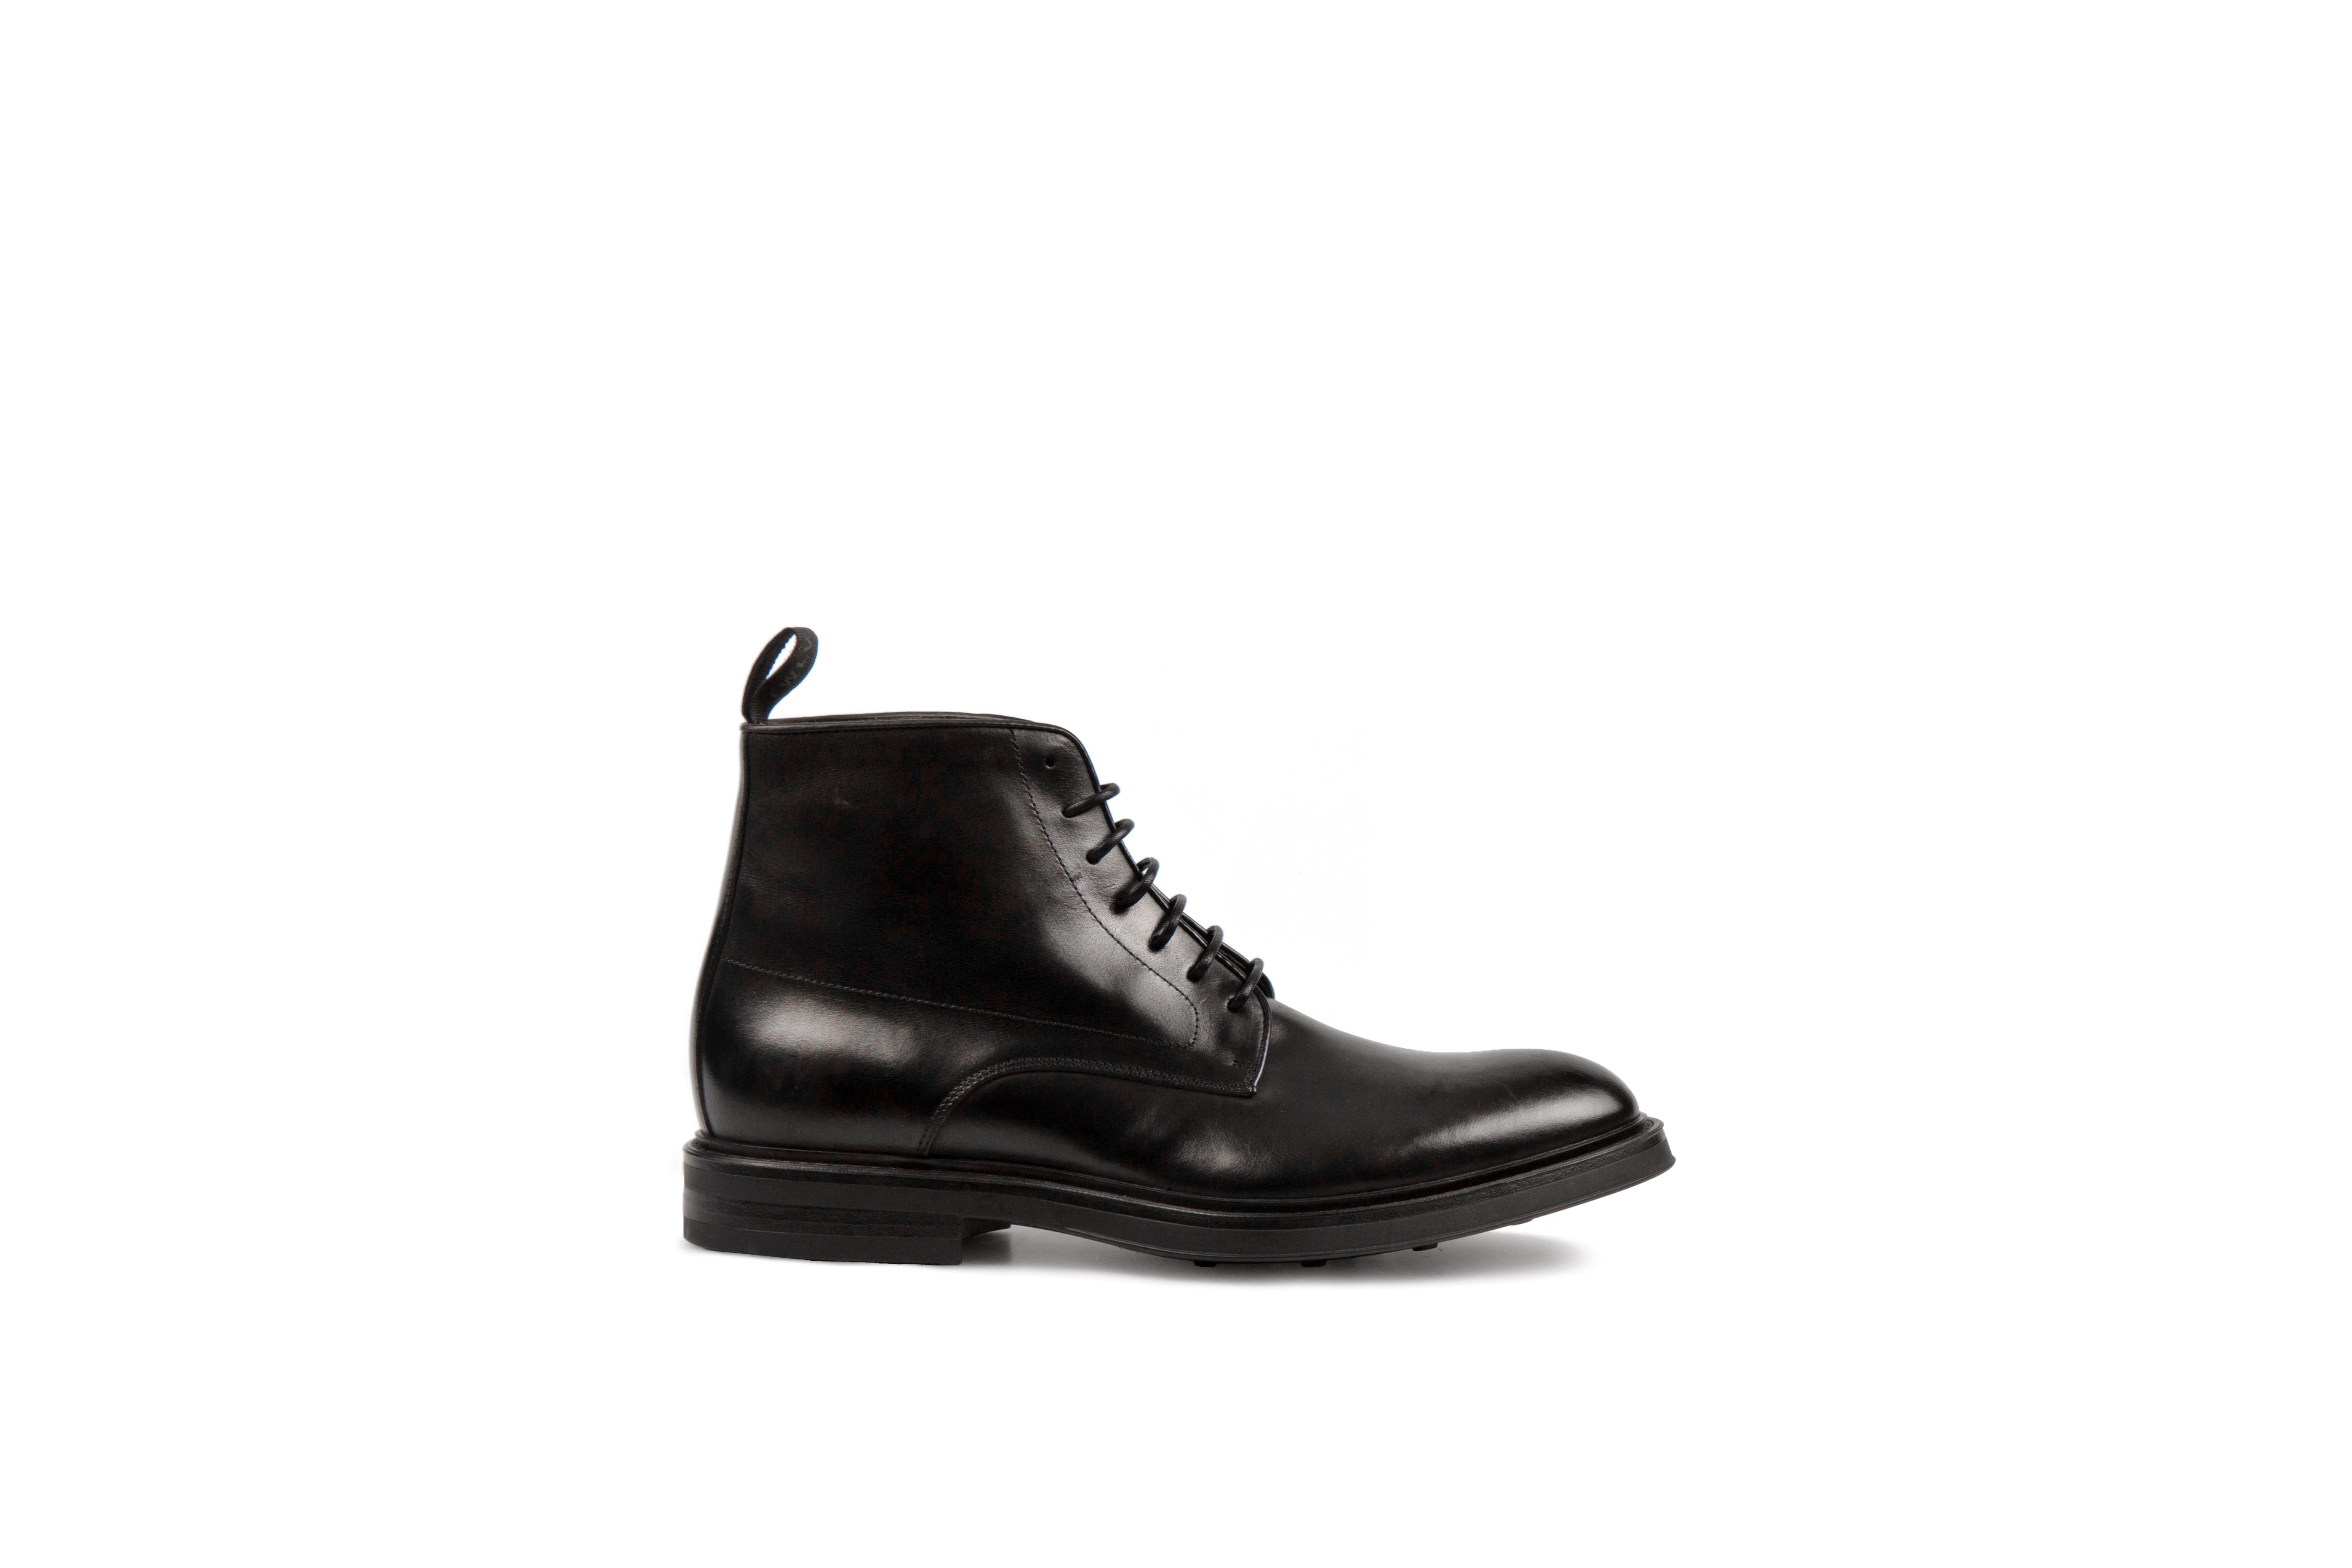 Link Black Calf Leather Balmoral Boots